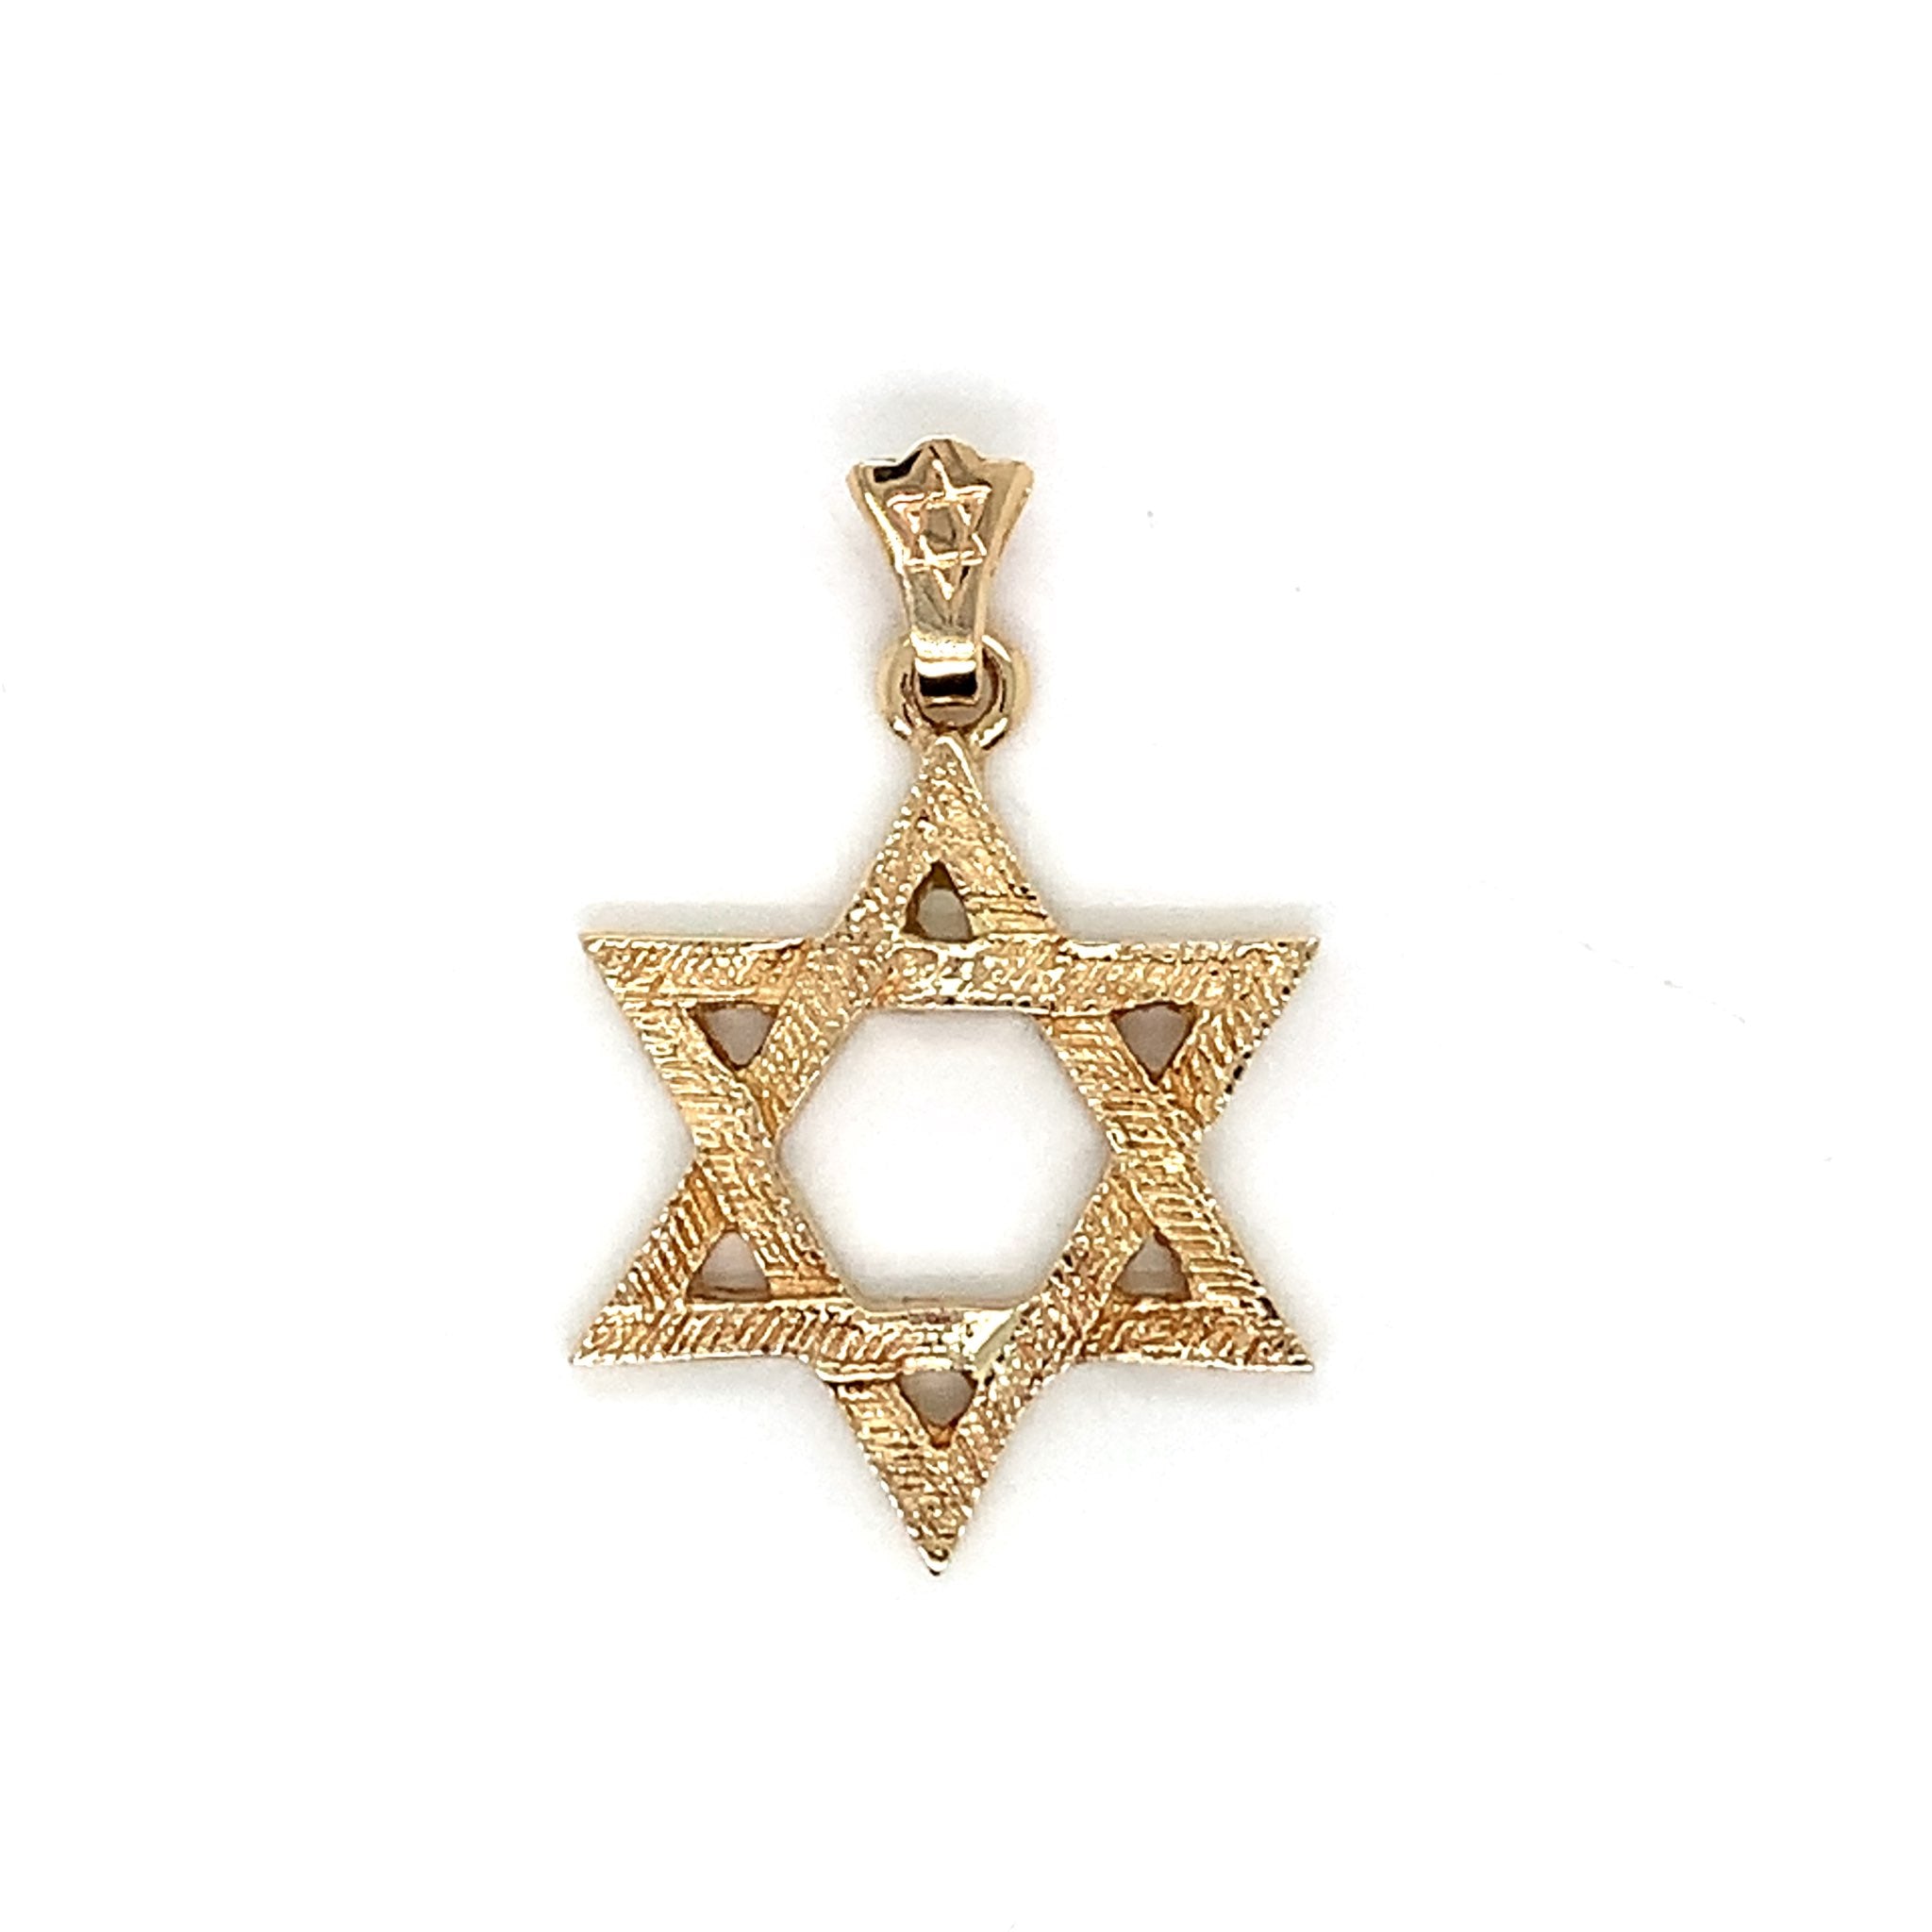 Solid Textured Star of David Pendant